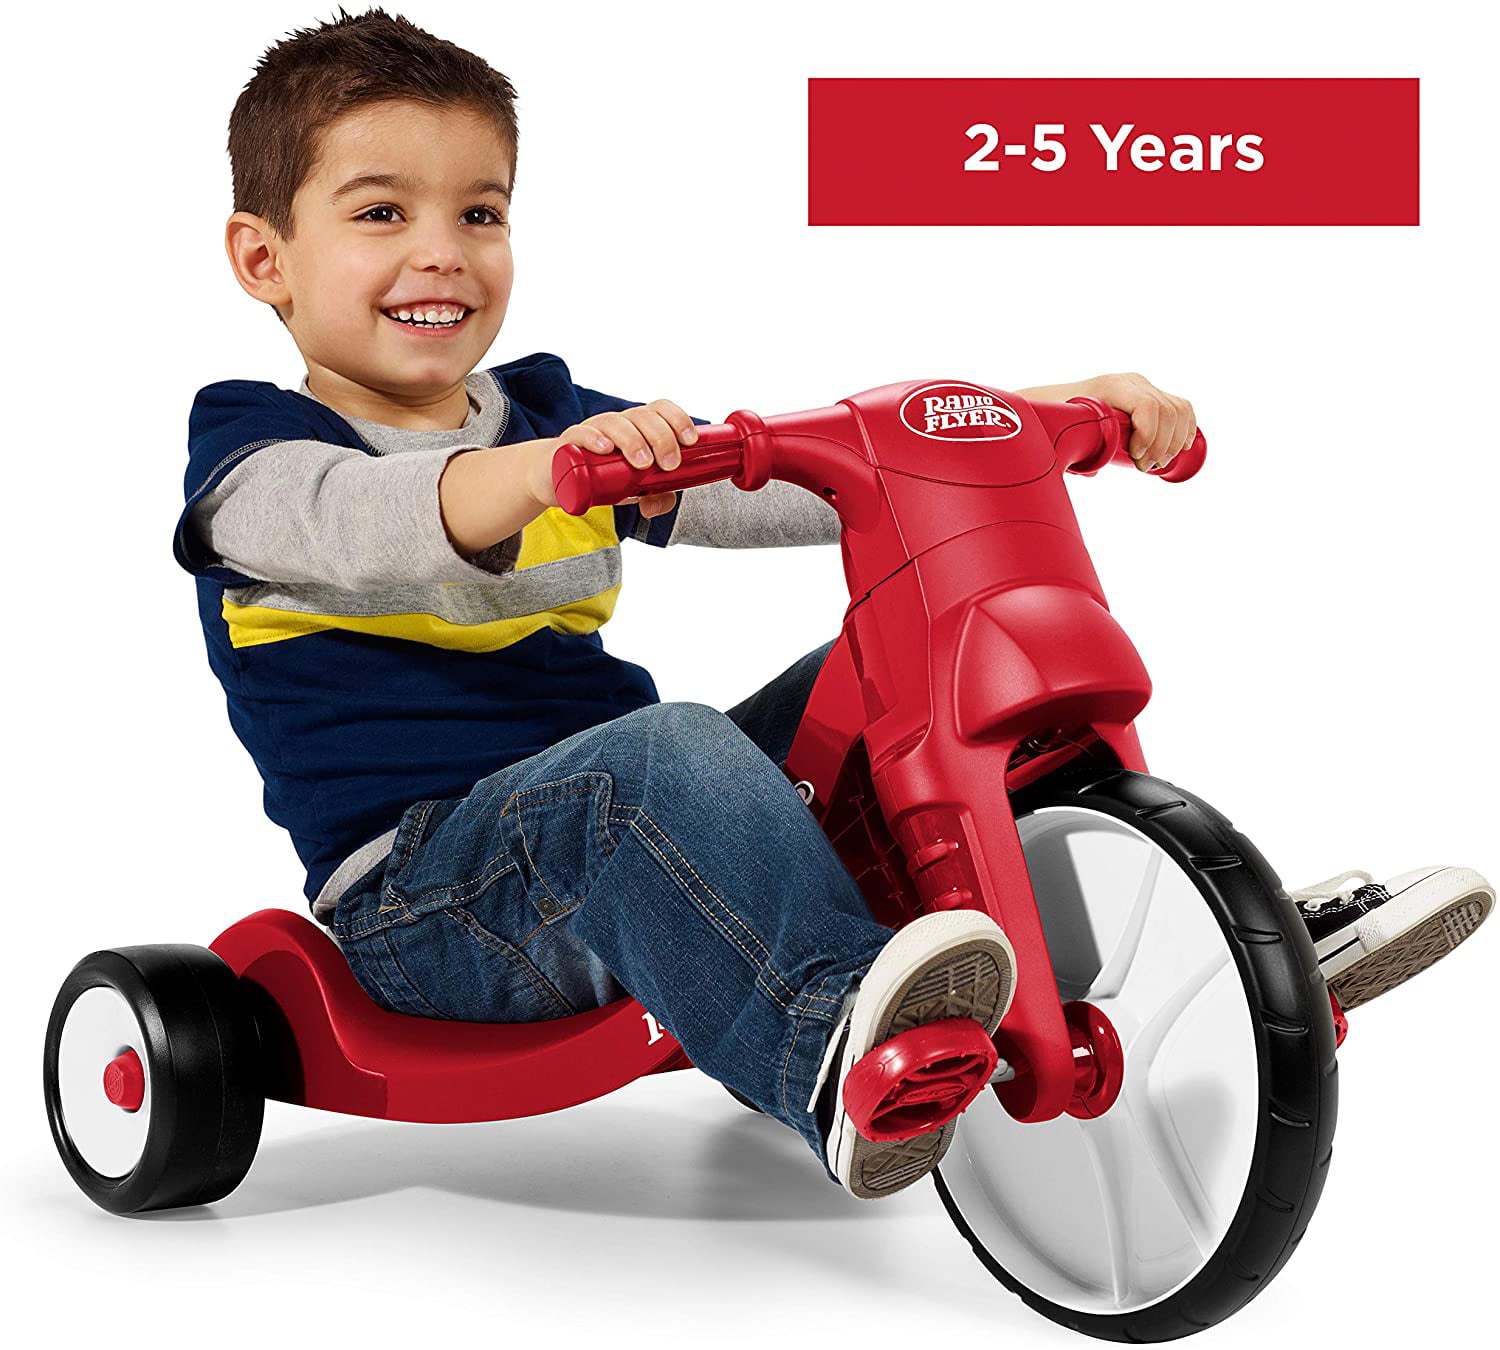 Junior Flyer Trike Outdoor Toy for Kids Ages 2-5